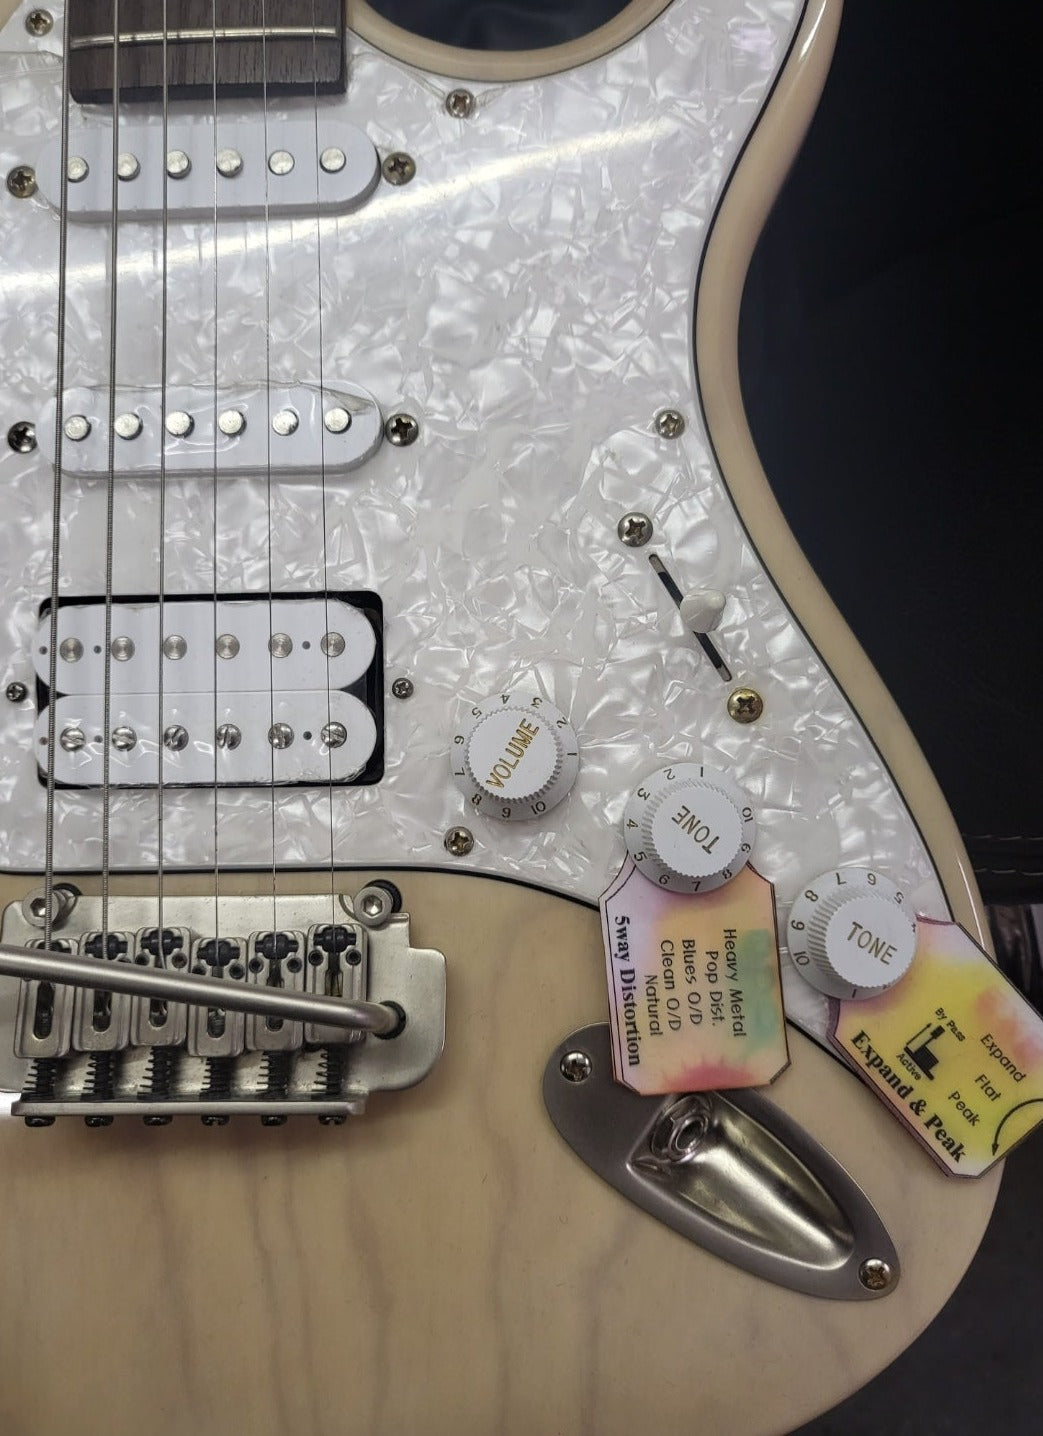 Electric Guitar Shine SI170 Blonde Strat Style With Built in Overdrive | Electric Guitar Shine SI-170 | Last Day Sale Price